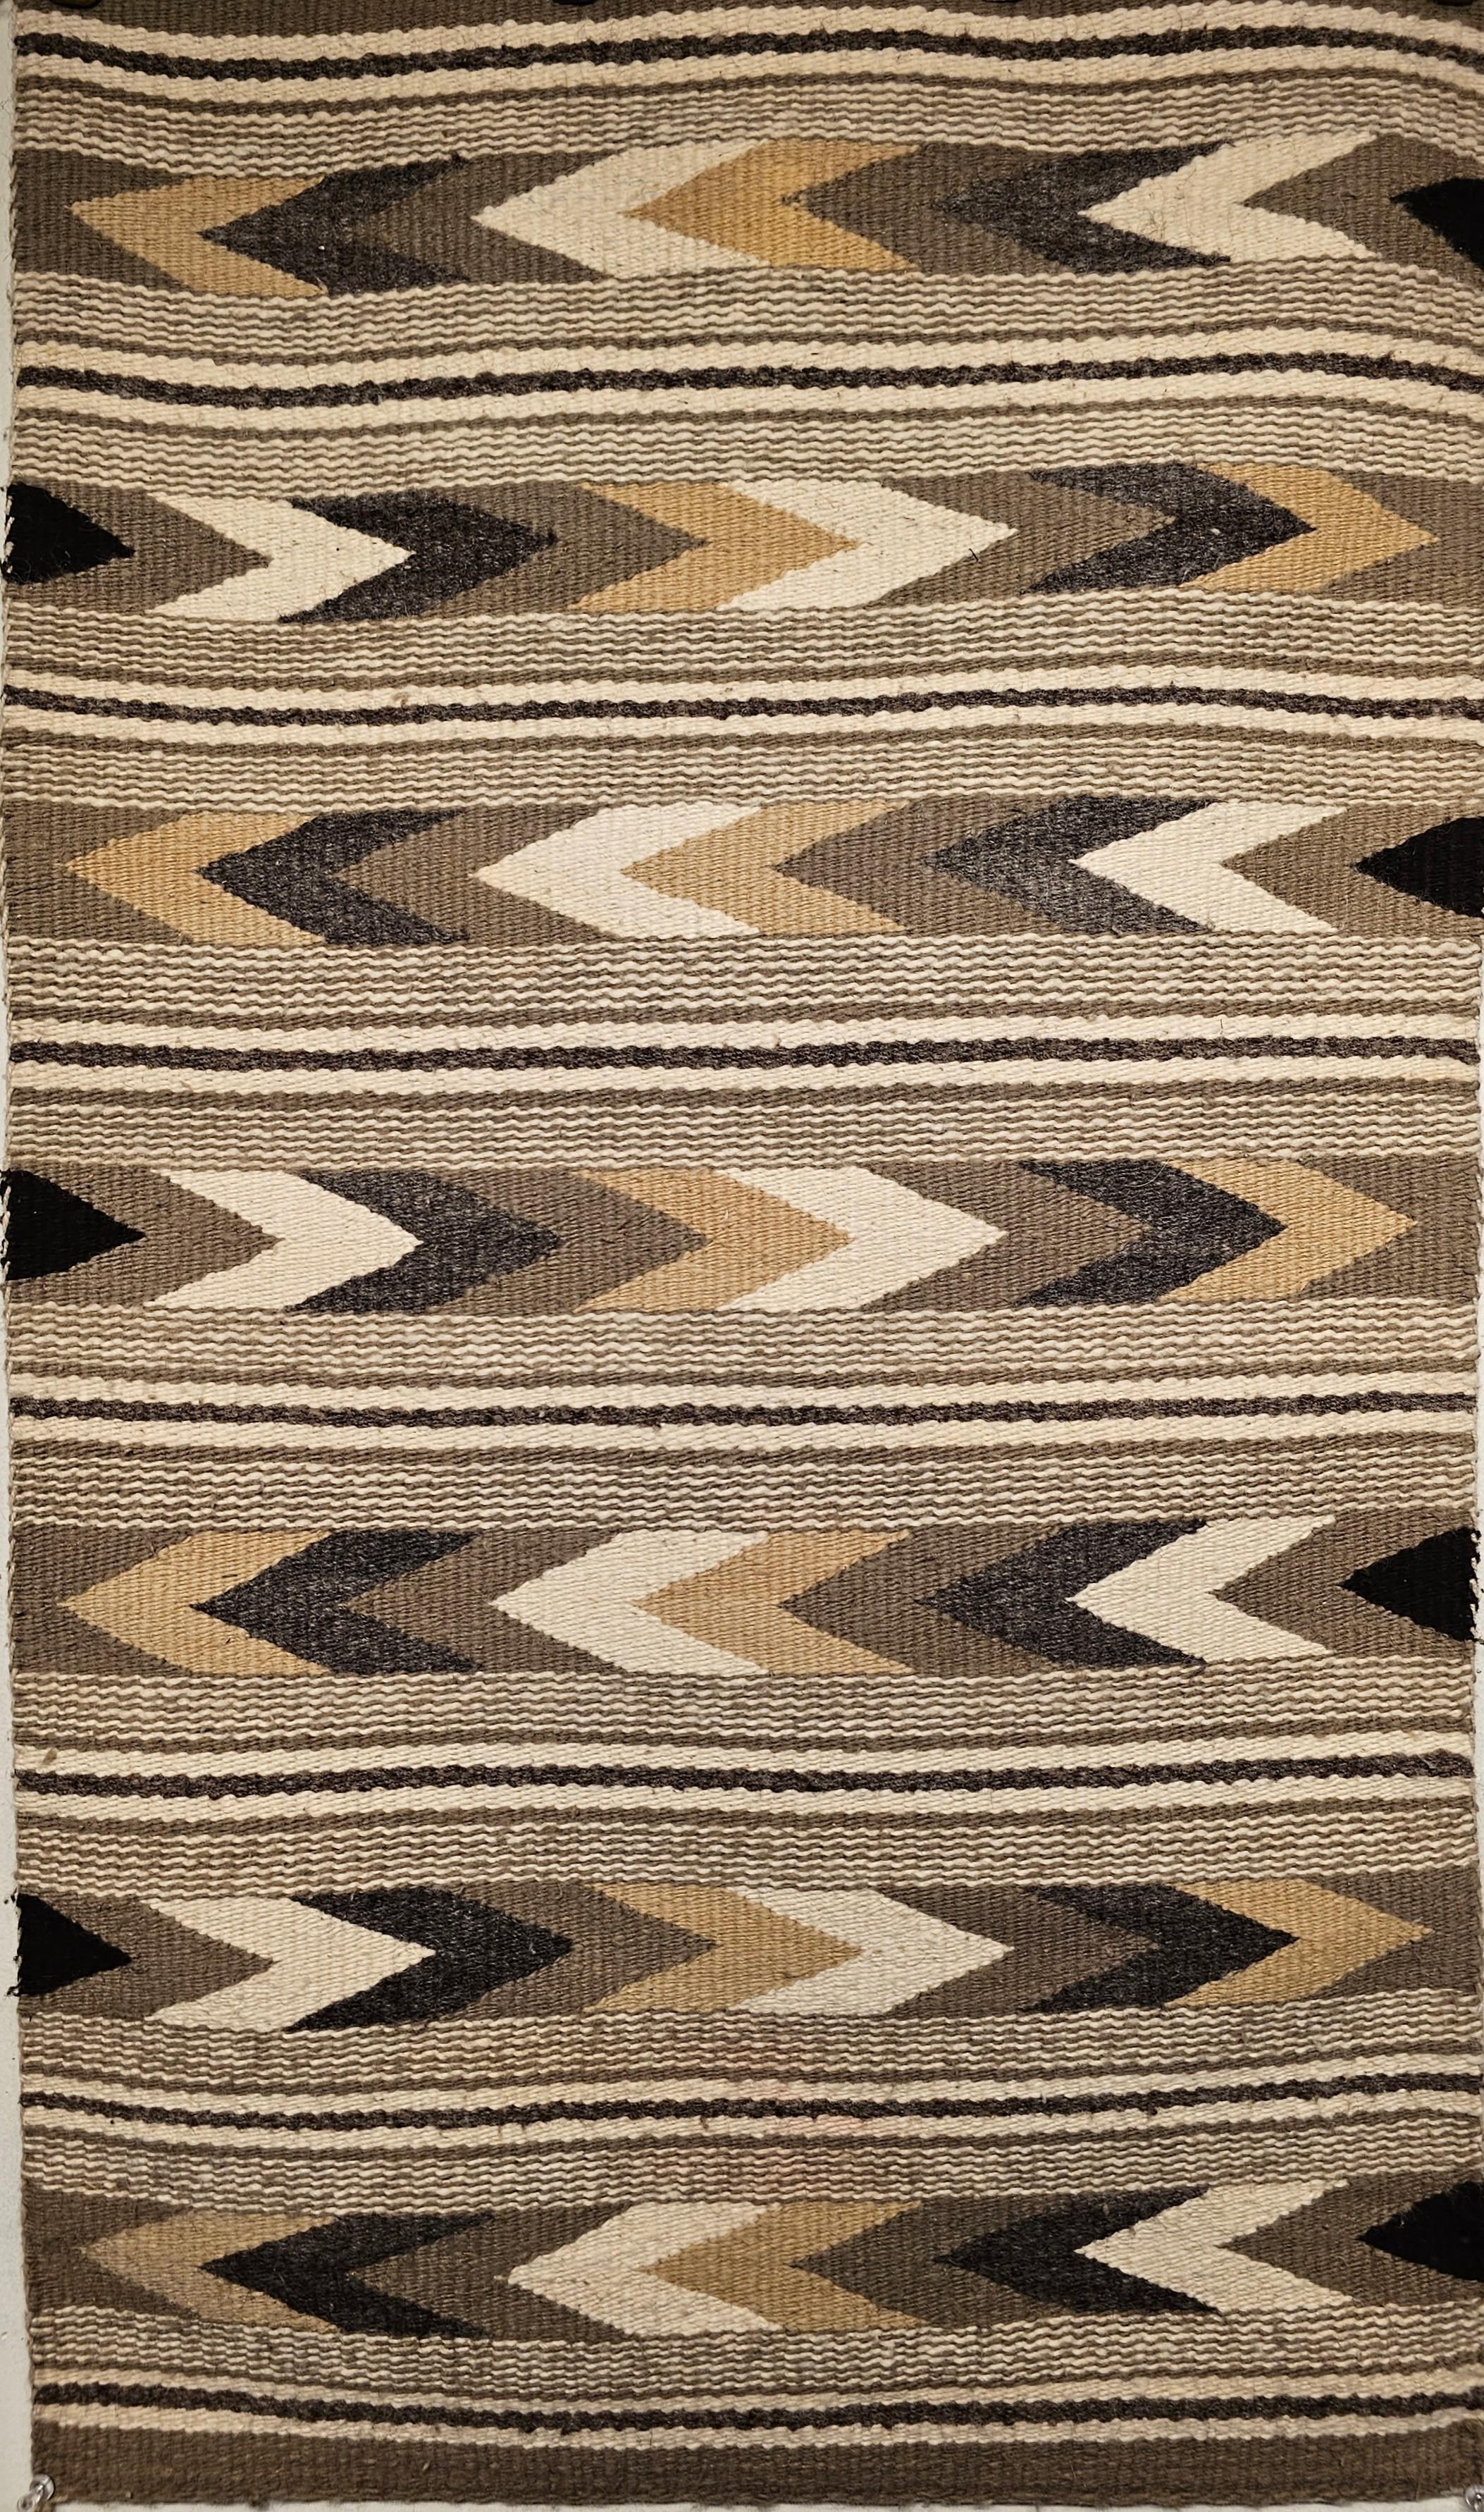  Vintage American Navajo rug in a banded chevron and stripe pattern with natural earth tone colors including gray, ivory, black, and caramel from the 3rd quarter of the 1900s.    Navajo weavers use natural organic dyes that are available around